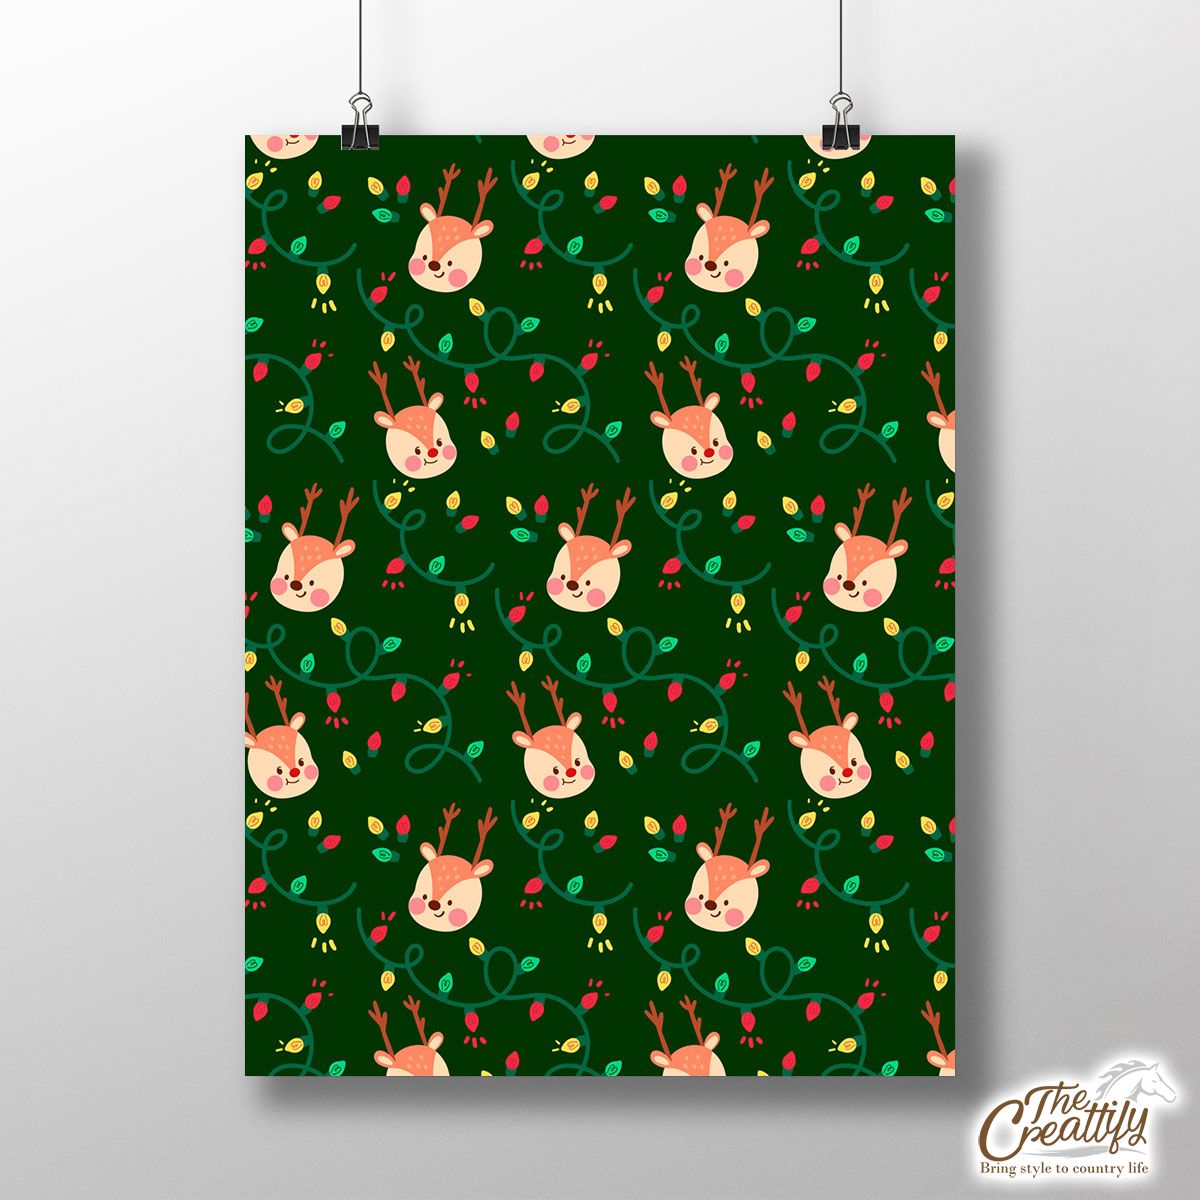 Reindeer With Christmas Light On Green Background Poster